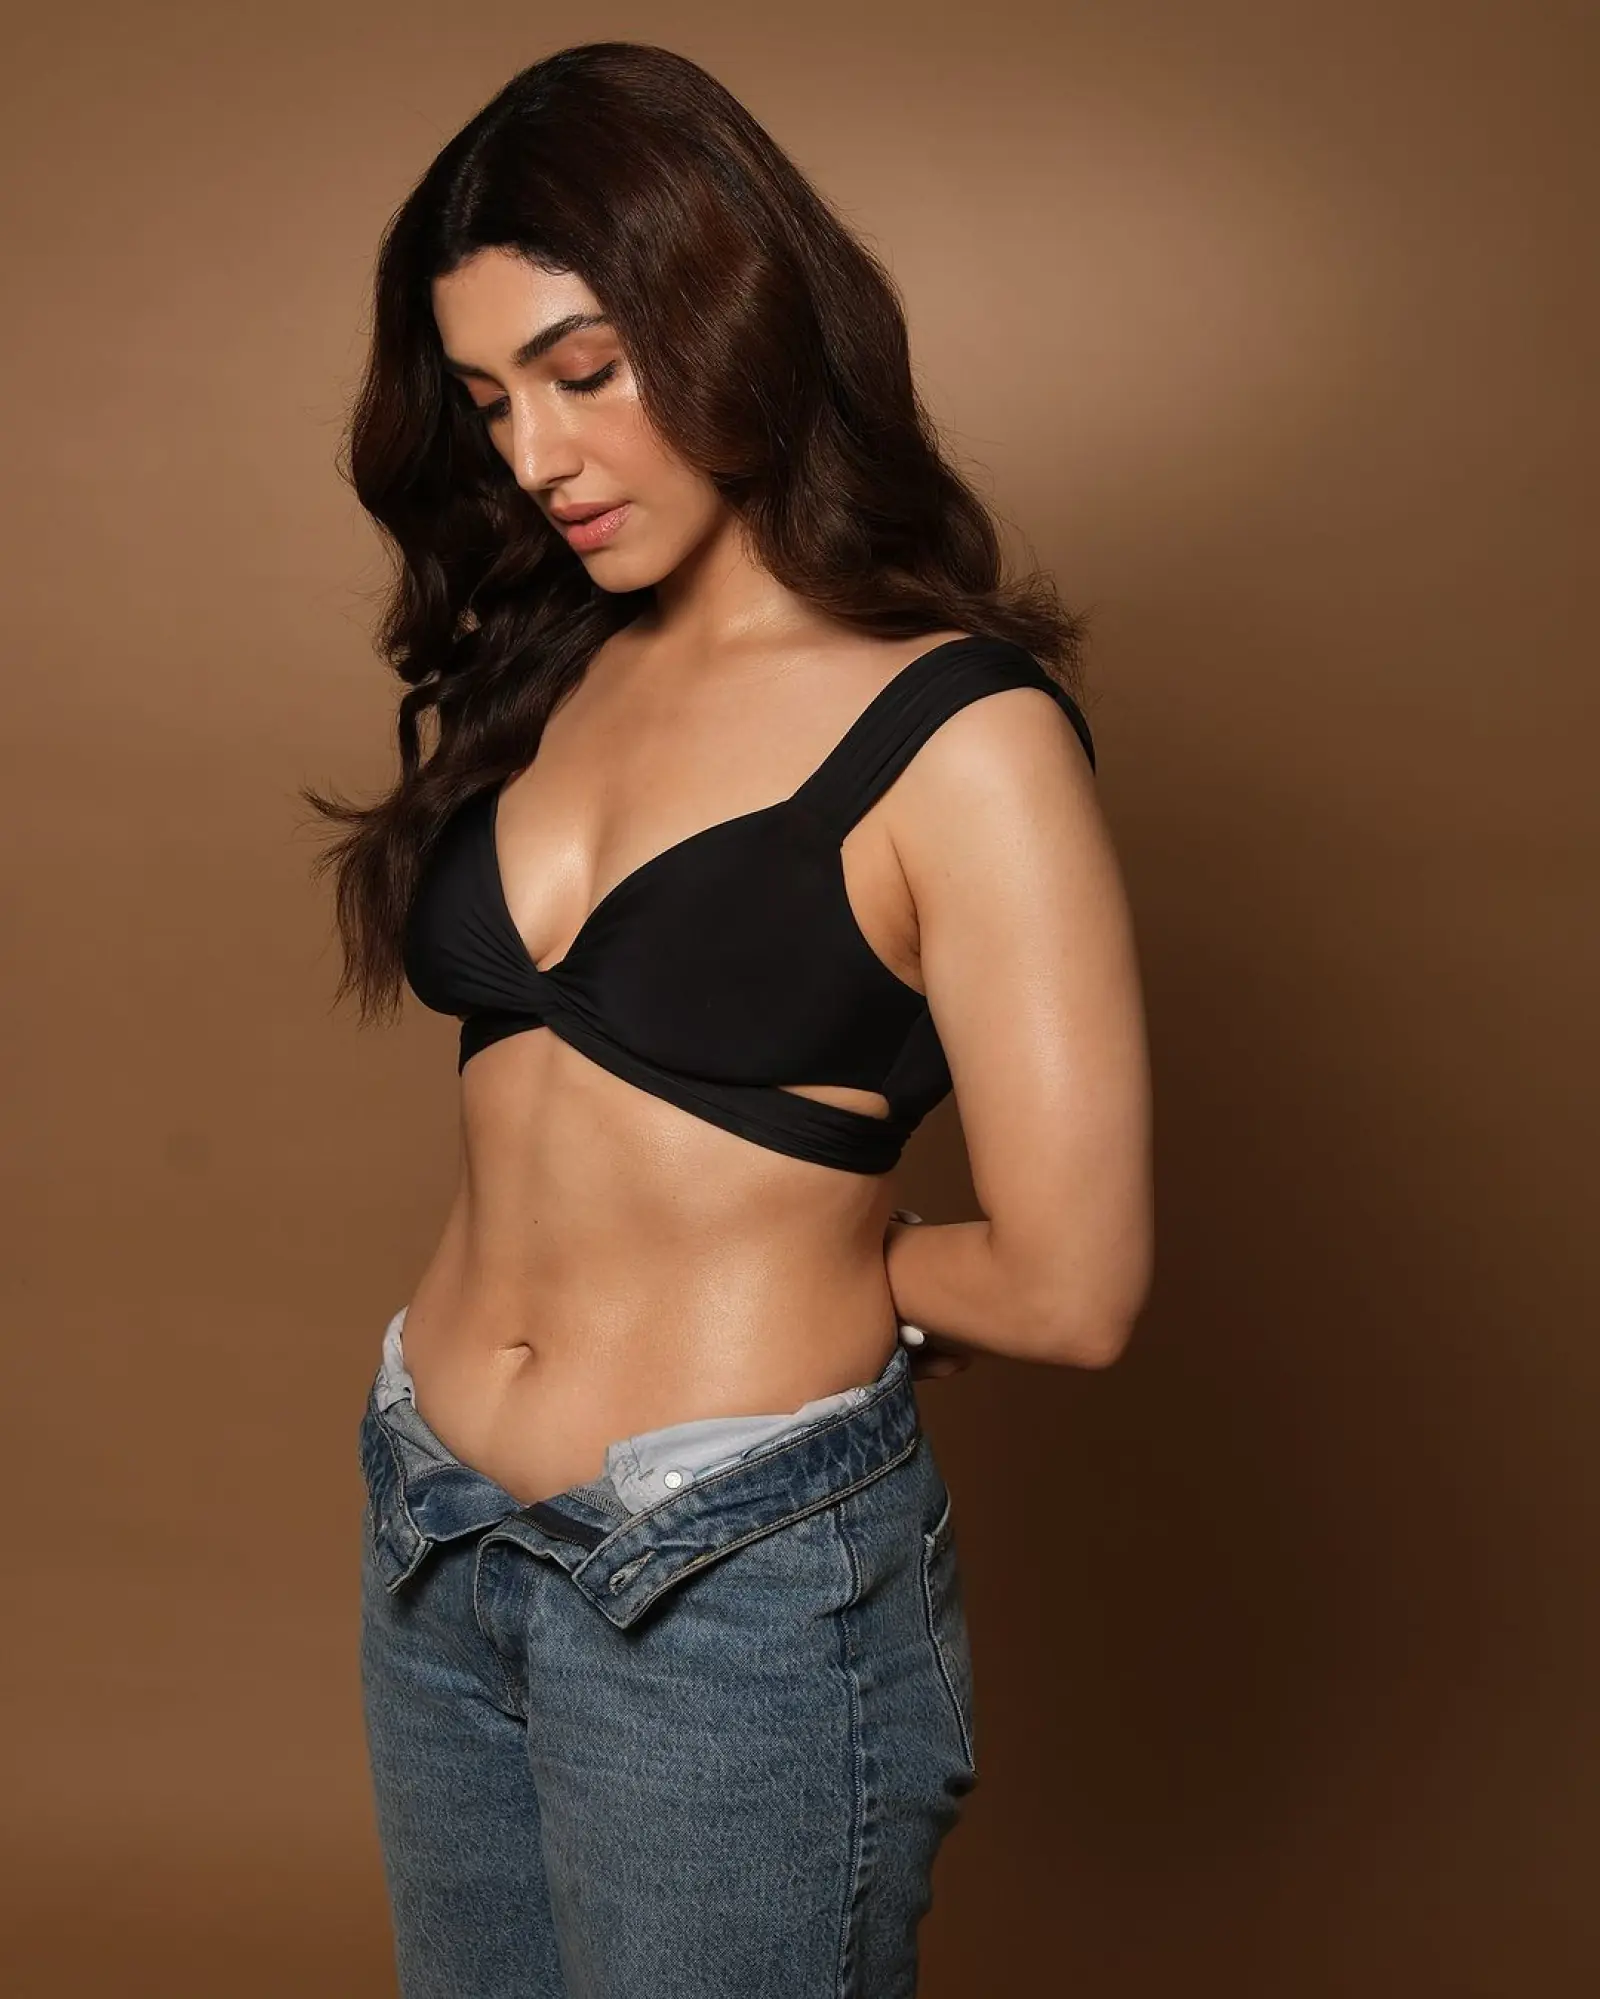 Delbar Aarya's New Pics Are Too Hot to Handle, Slips Into Sexy Look